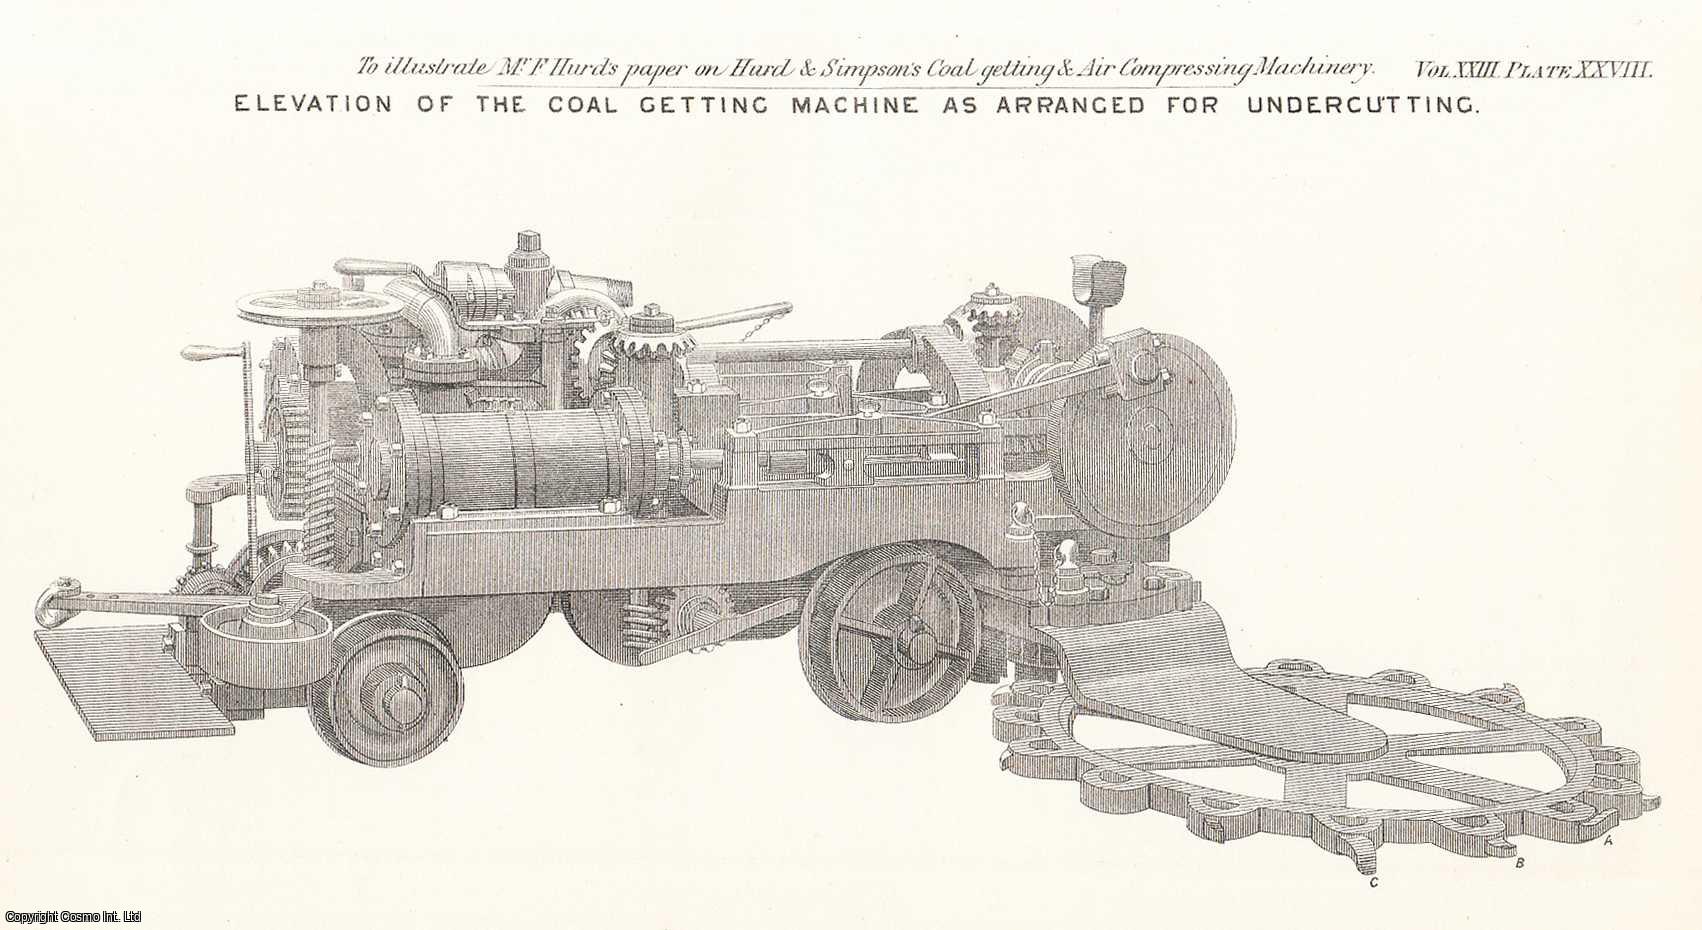 Frederick Hurd - Hurd & Simpson's Coal-Getting & Air-Compressing Machinery. An original article from the Transactions of the North of England Institute of Mining Engineers, 1874.